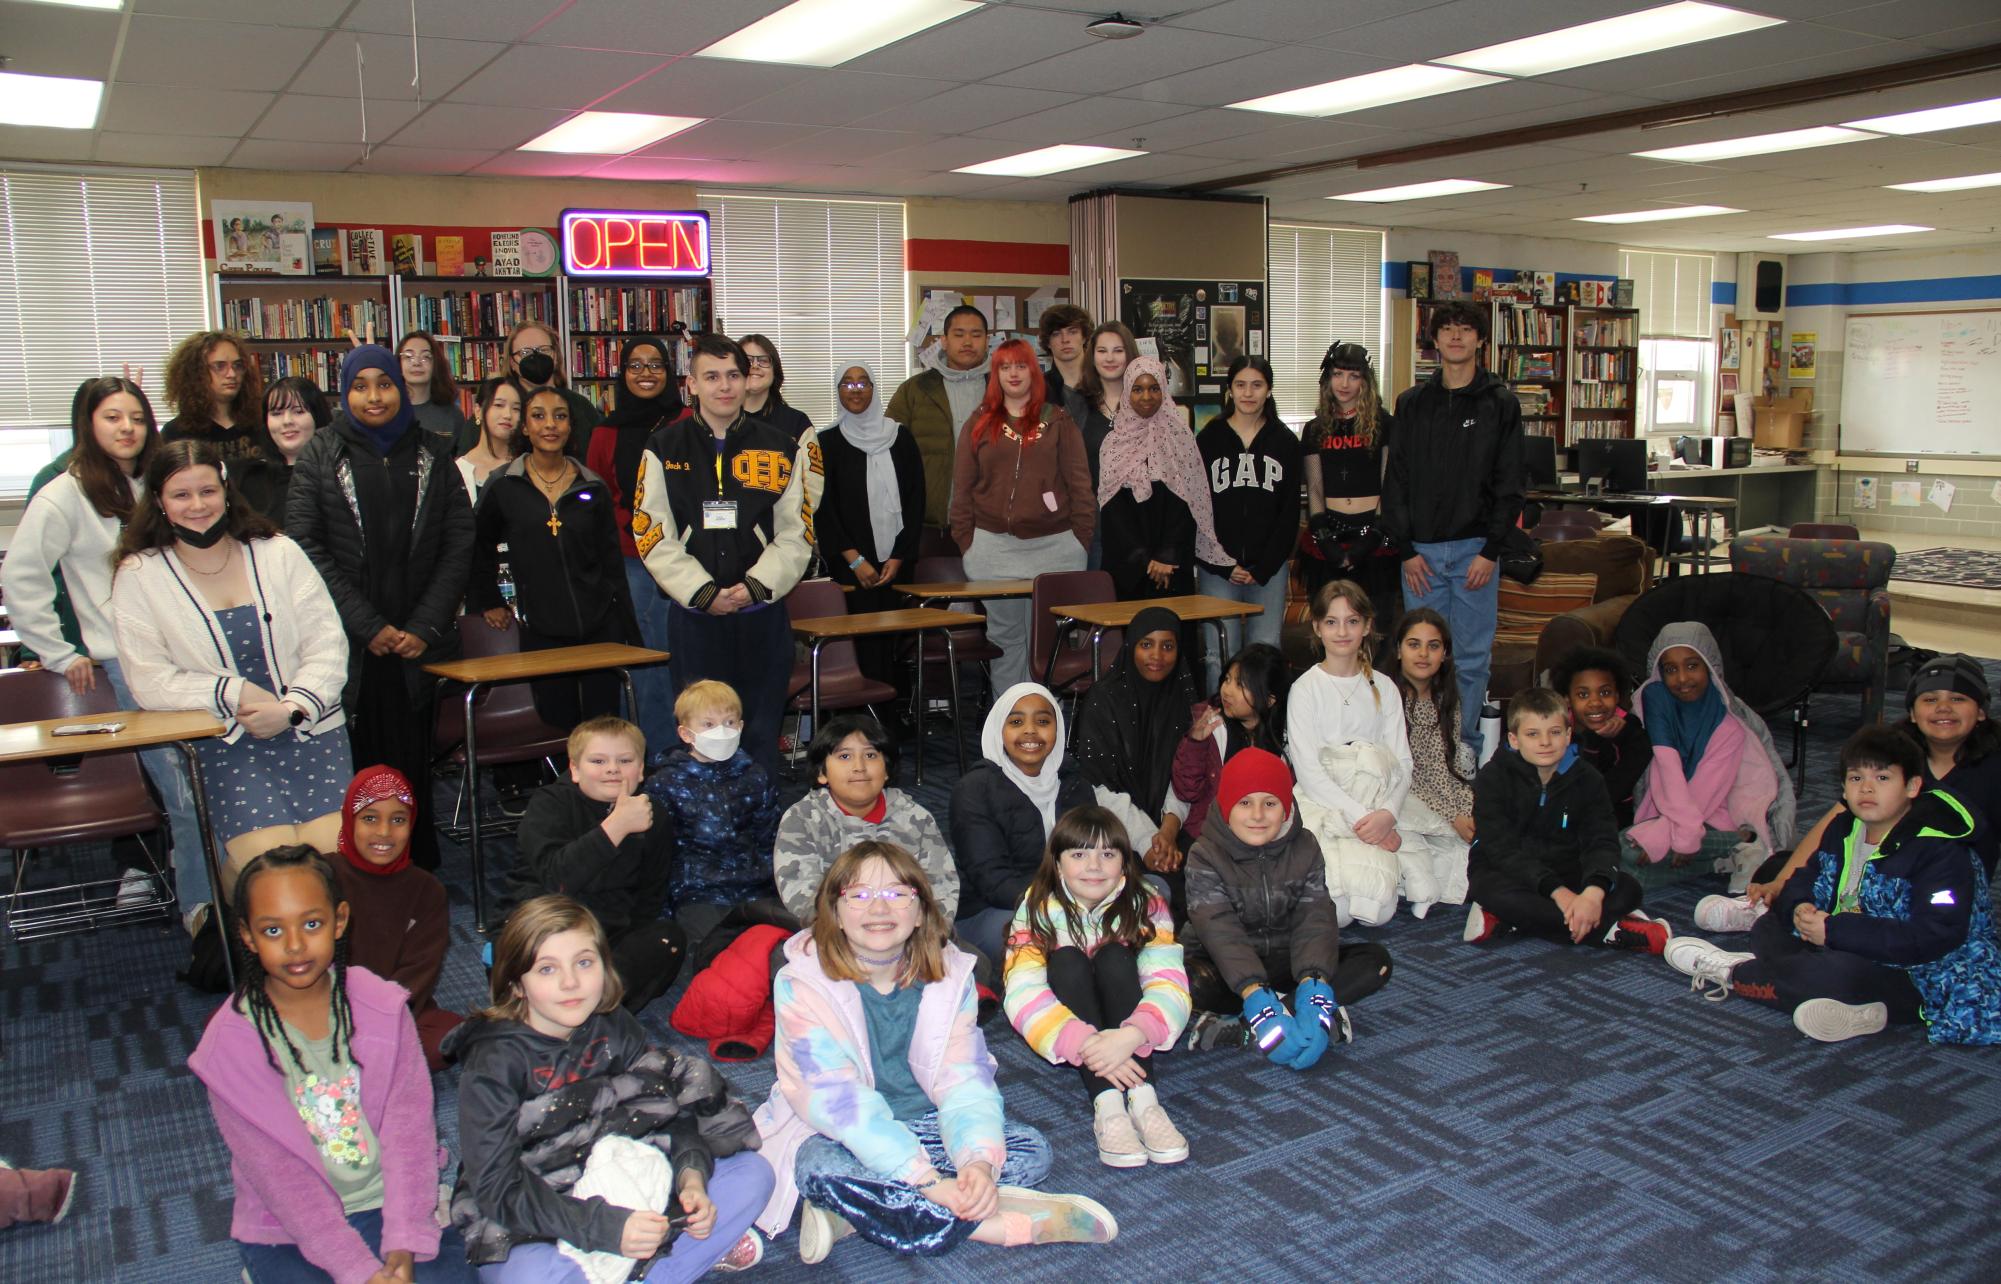 Highlands LEAP classroom (featuring mixed grades 3-5) visited The Heights Herald to learn more about journalism during their newspaper unit.